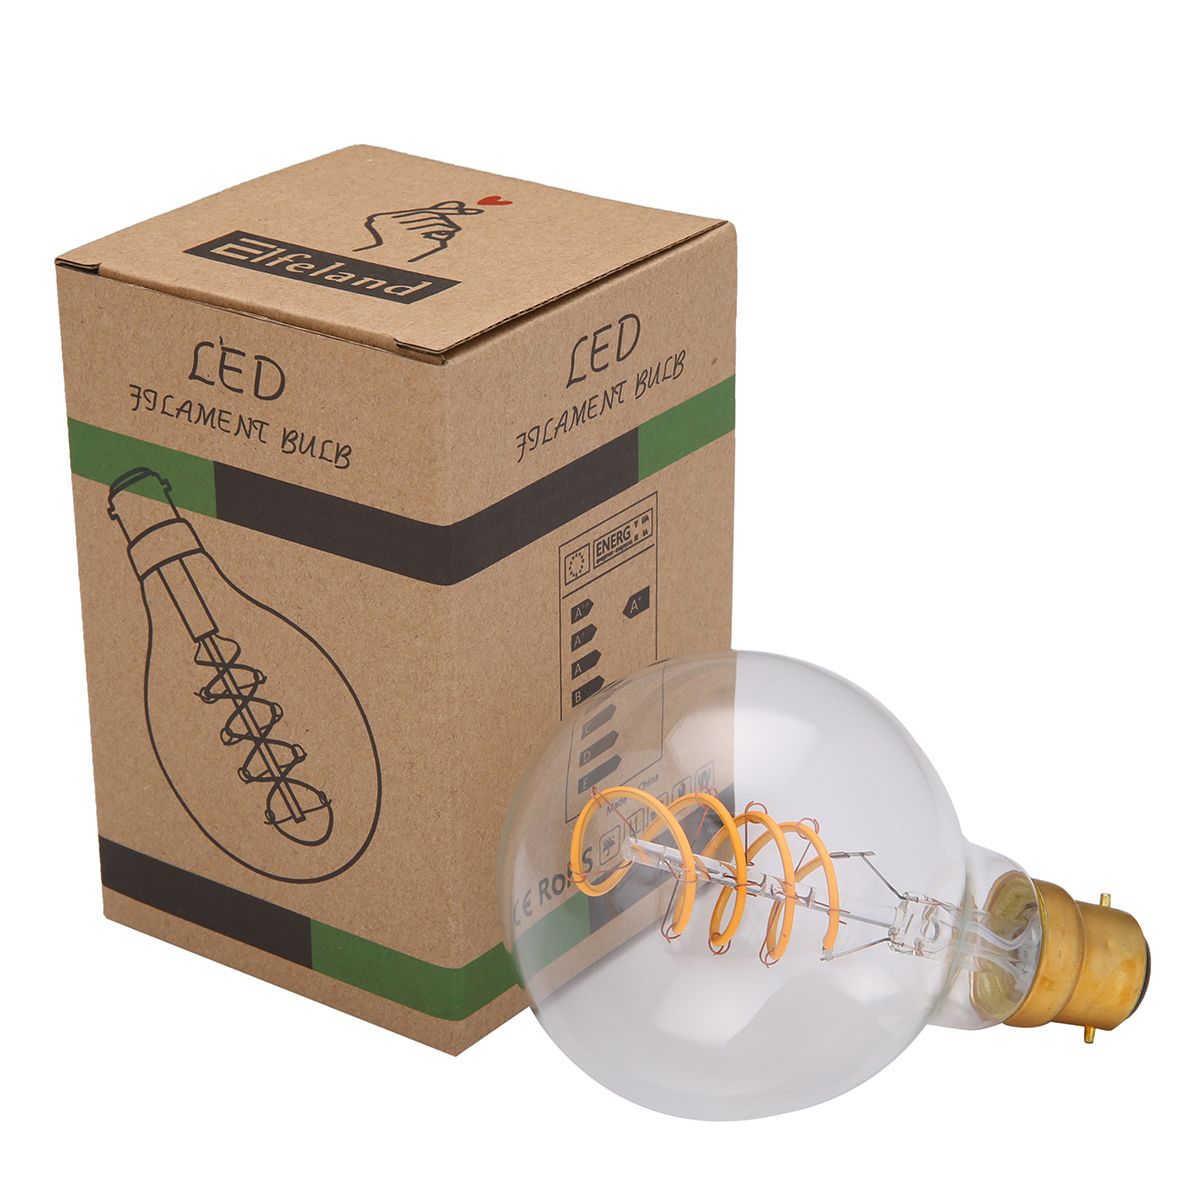 Elfeland-3PCS-Dimmable-E27-B22-G80-Vintage-Amber-Glass-Shell-3W-LED-COB-Light-Bulb-for-Indoor-Home-1515966